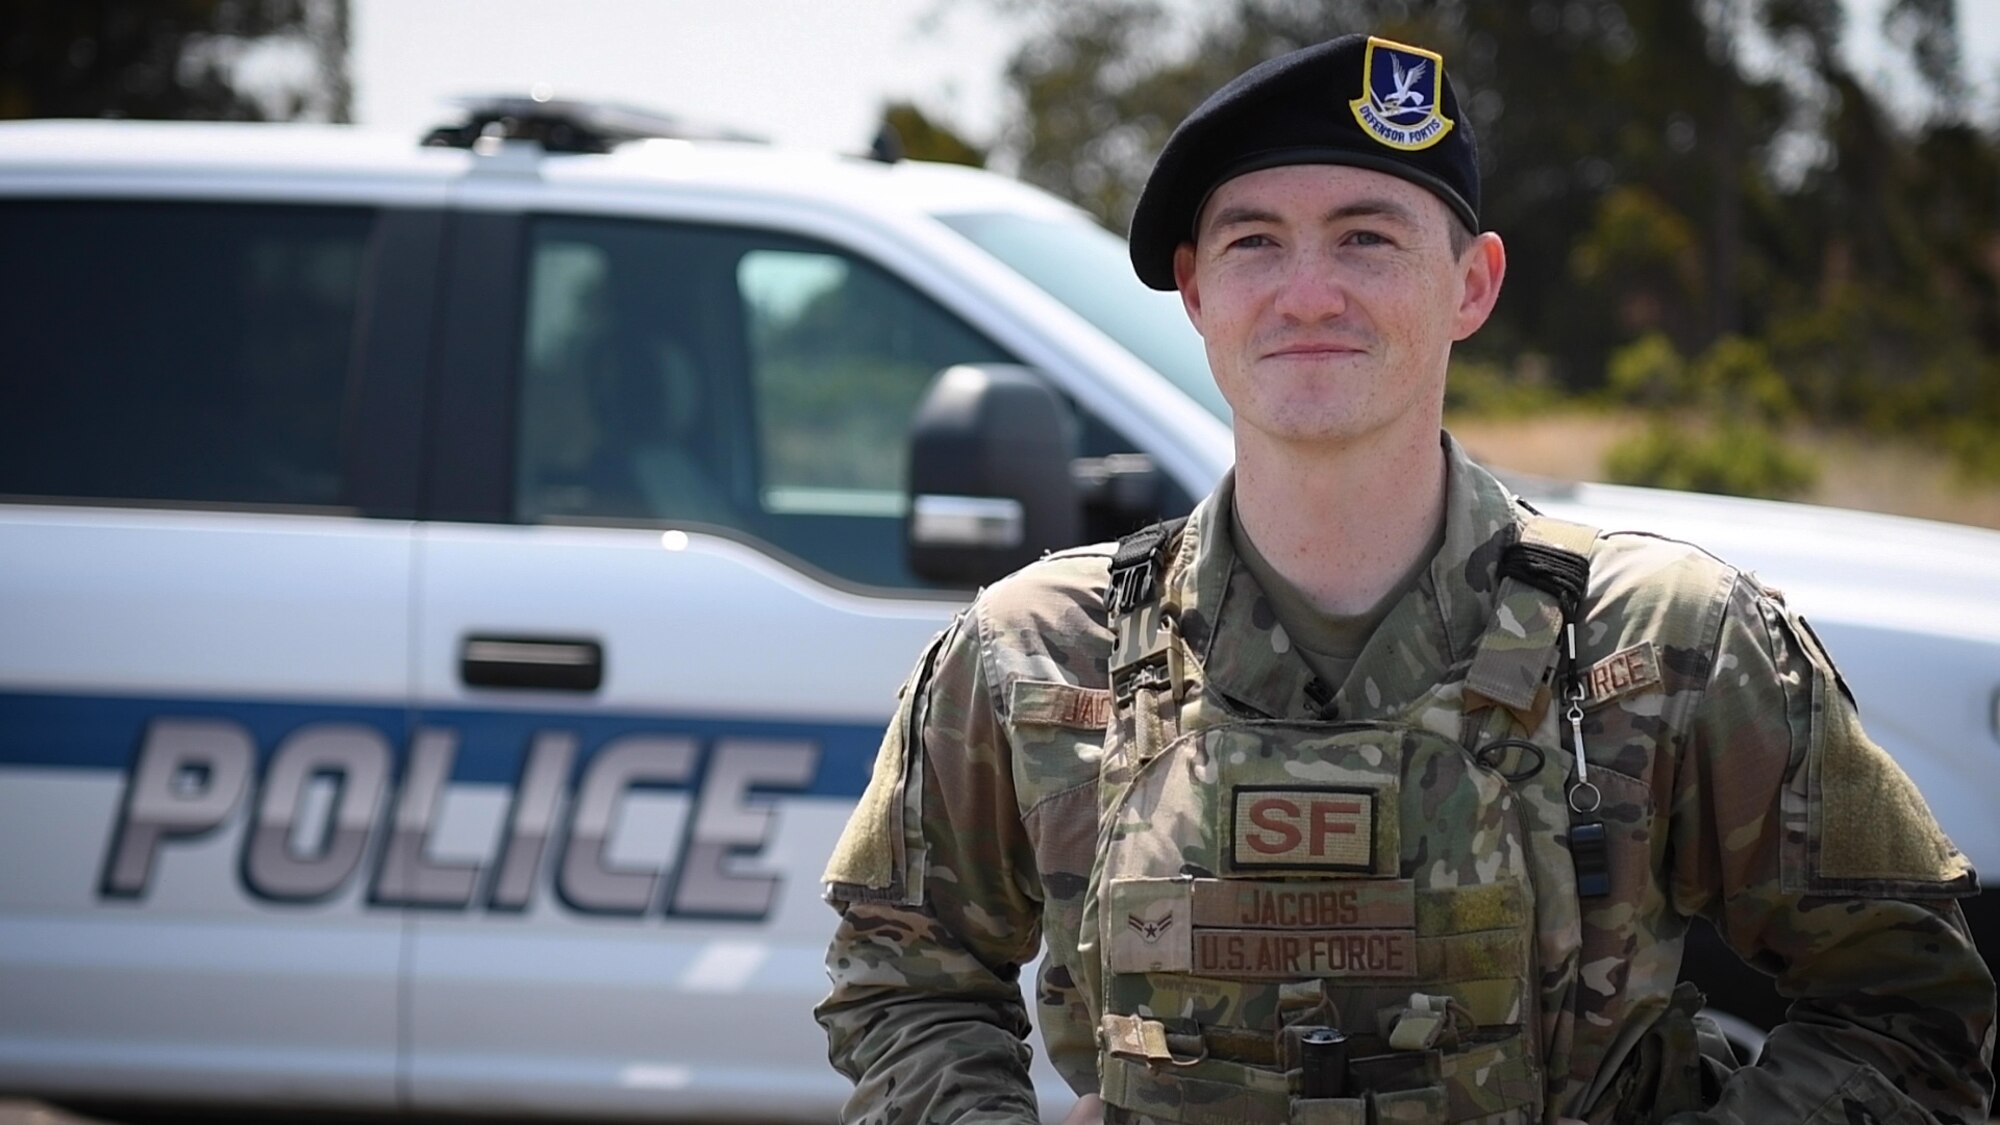 Airman 1st Class Austin Jacobs, stands in front of his security forces vehicle, July 14, 2021 at Vandenberg Space Force Base, Calif., as he speaks about the day he rescued Mr. George Metzger retired U.S. Army. (U.S. Space Force Photo by Airman 1st Class Rocio Romo)